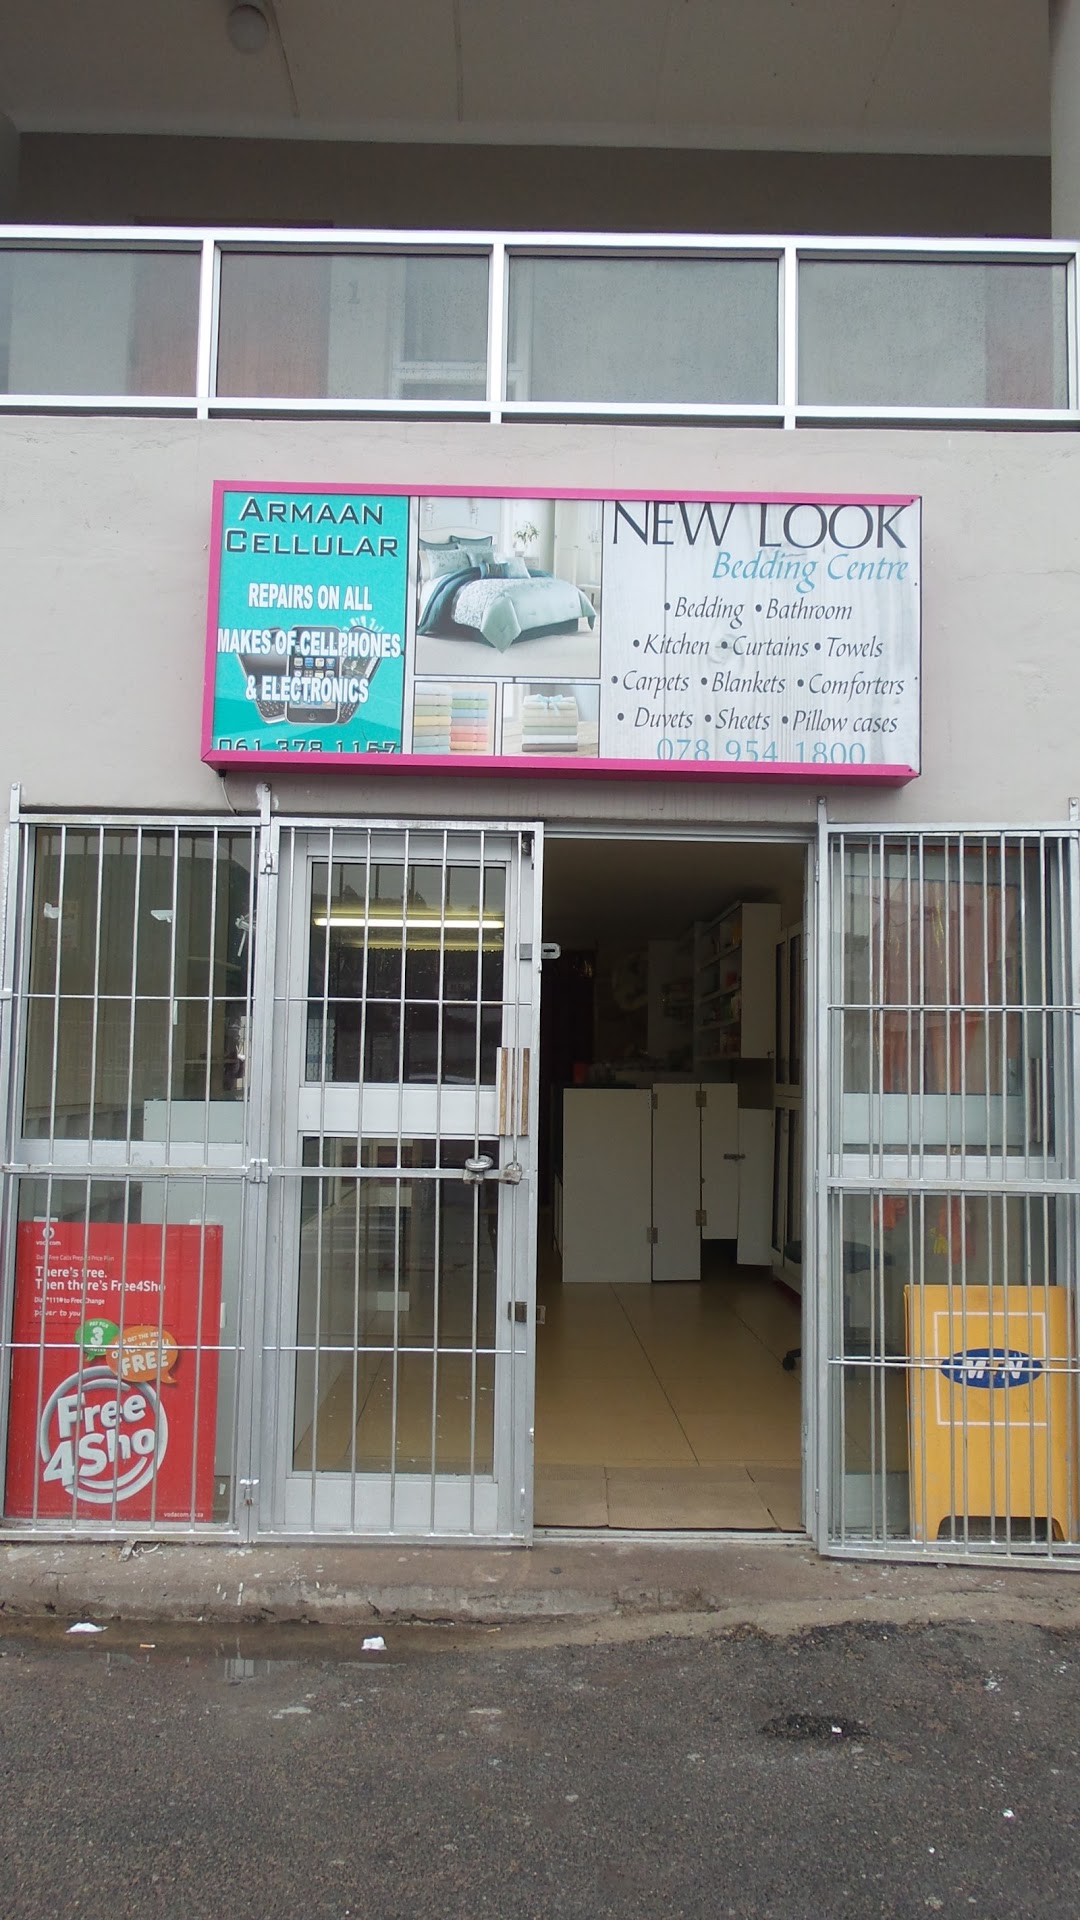 New Look Bedding Centre